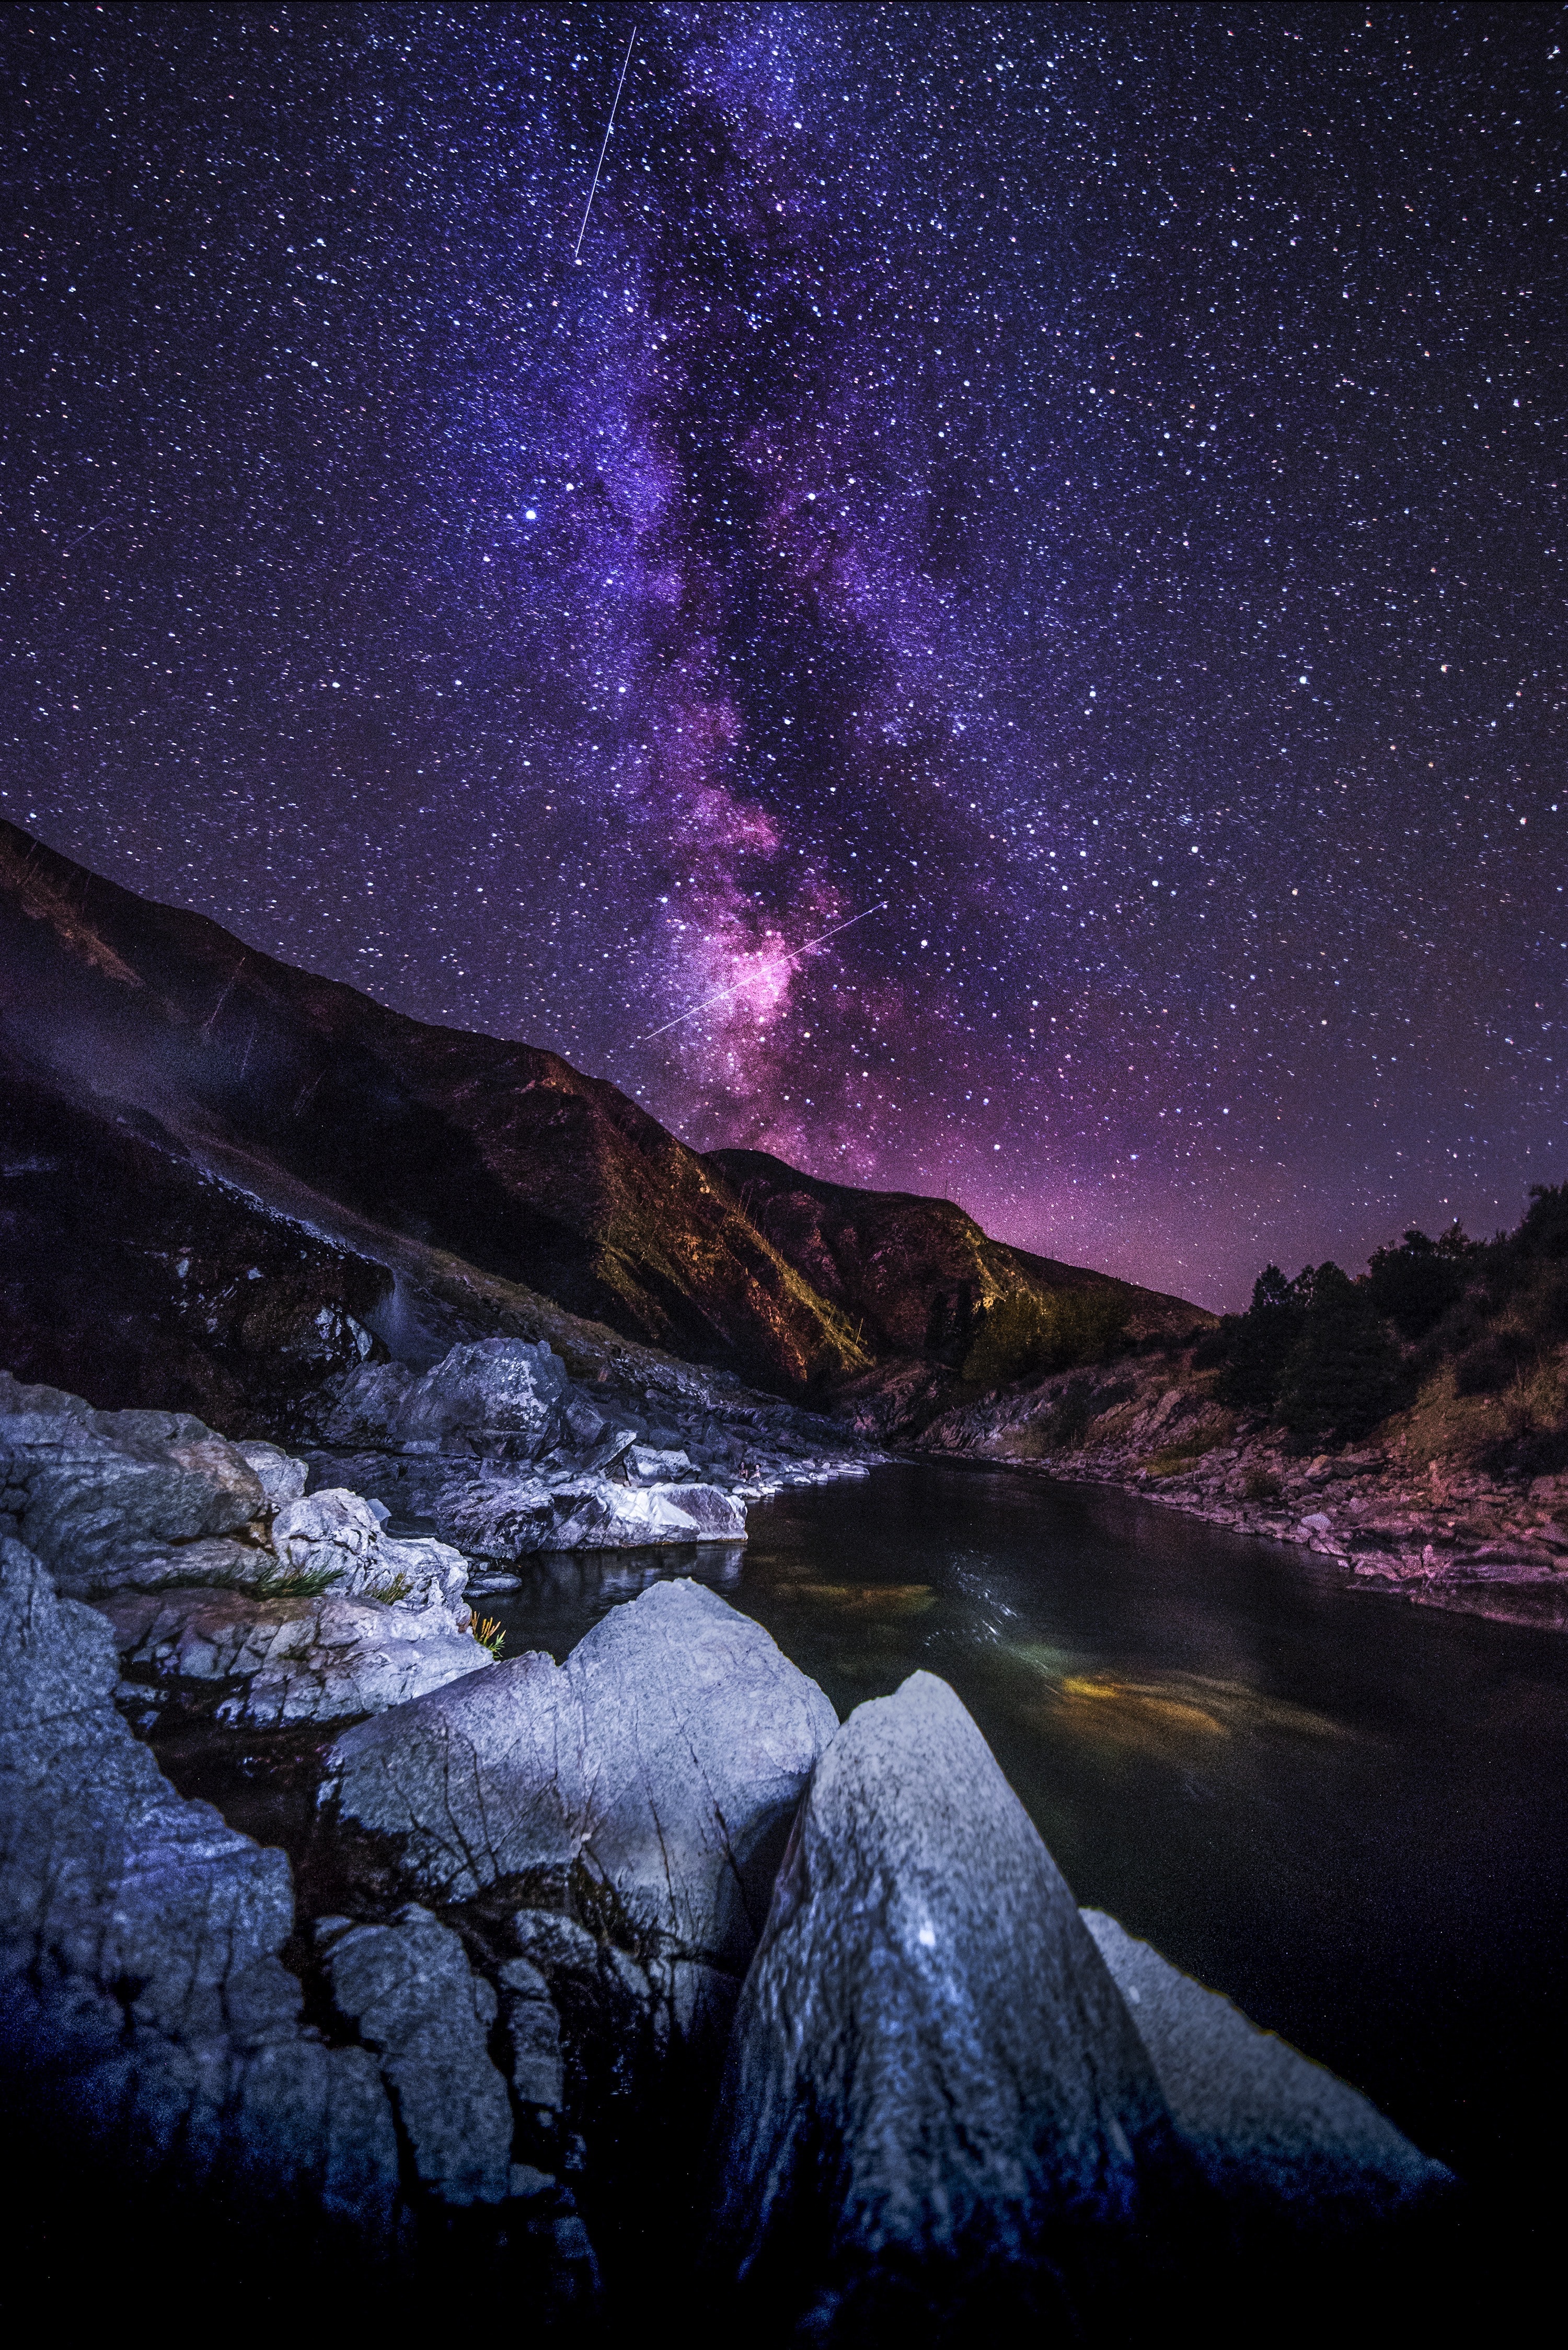 starry sky, rivers, nature, landscape, mountains, night